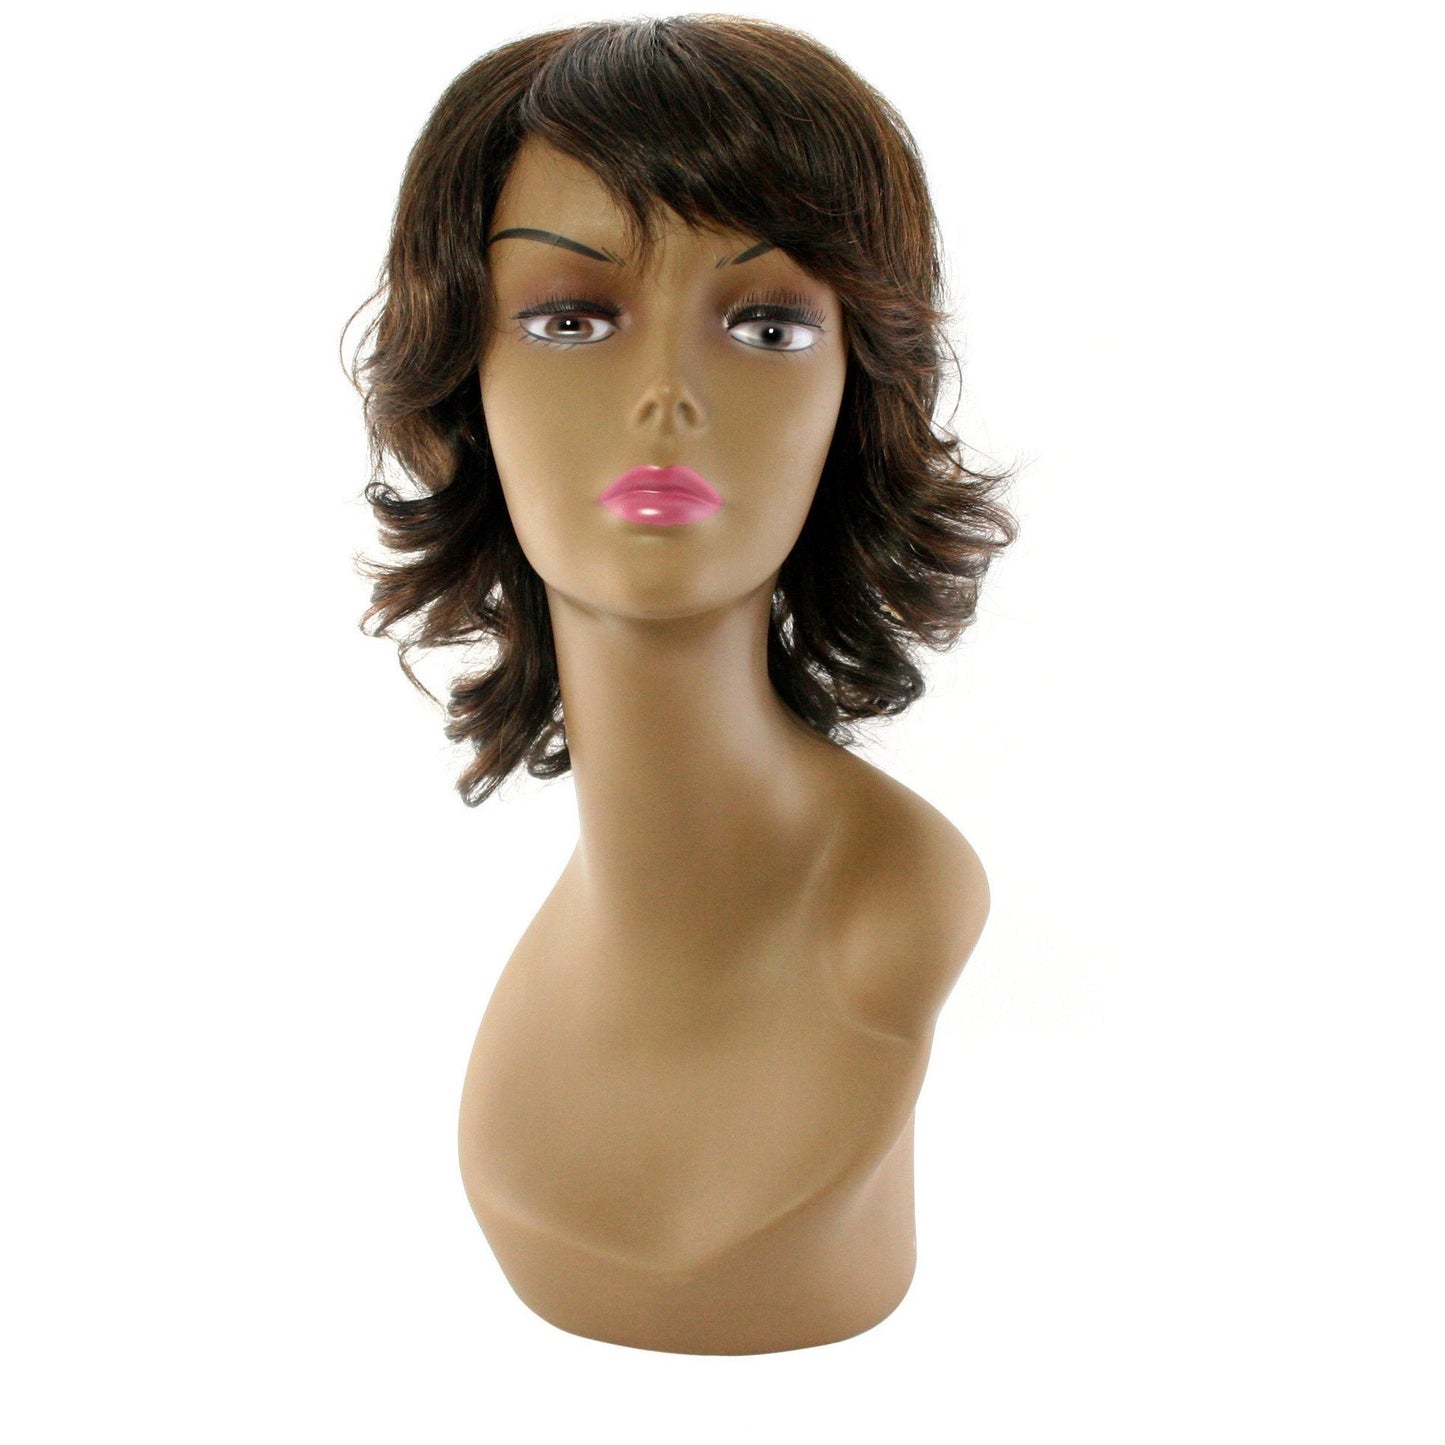 Pallet # 146 -  100% Human Hair  Wig - variety of styles and colors - 423 PIECES HUMAN HAIR WIGS X, Y, Z